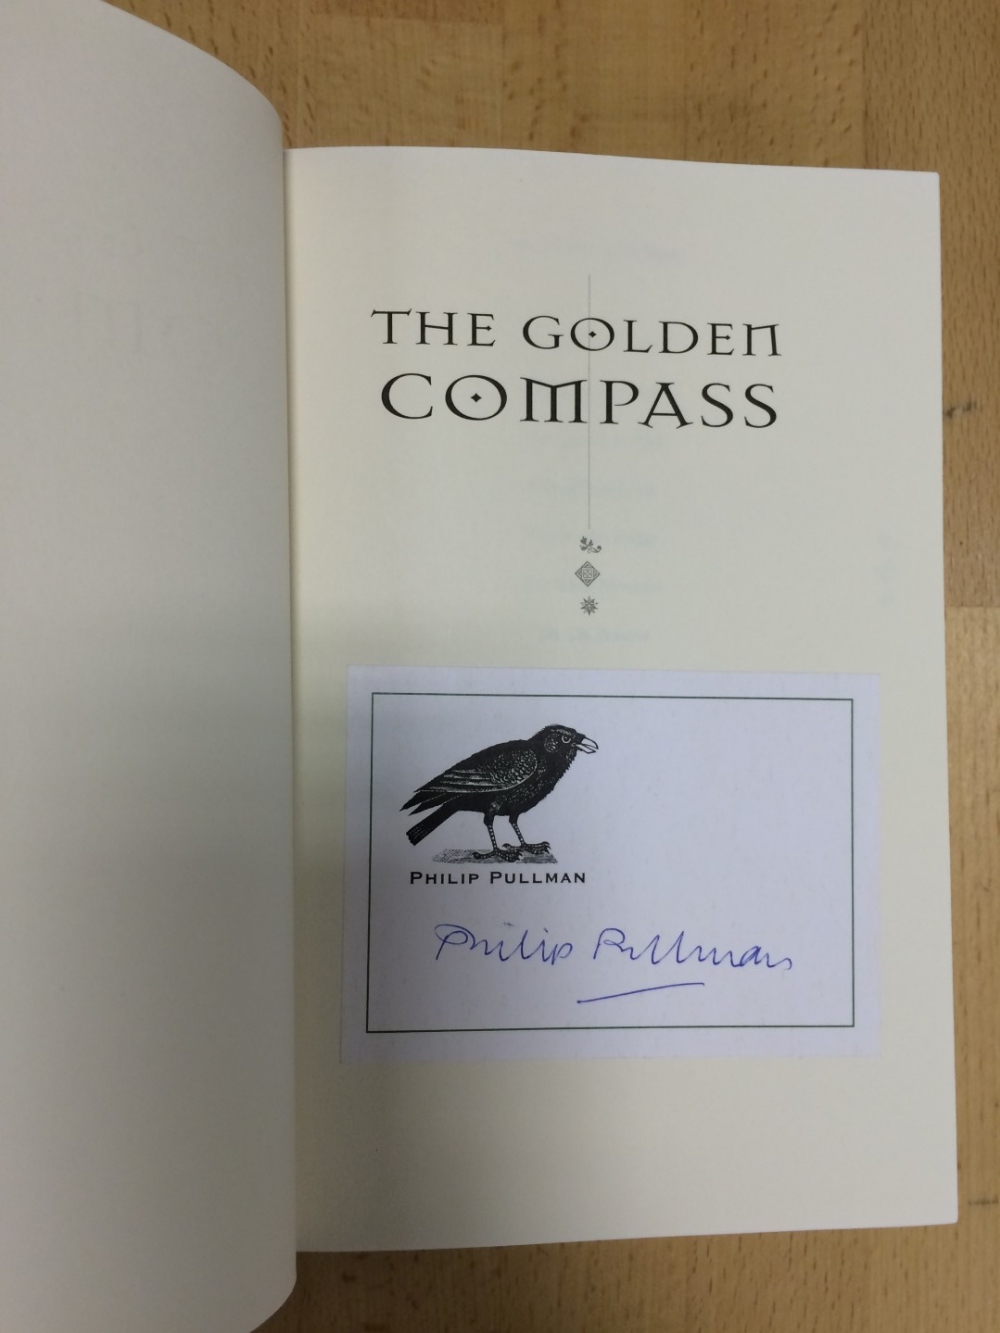 PULLMAN (Philip) The Golden Compass, first edition Knopf 1996, signed by the author to a label to - Image 2 of 5